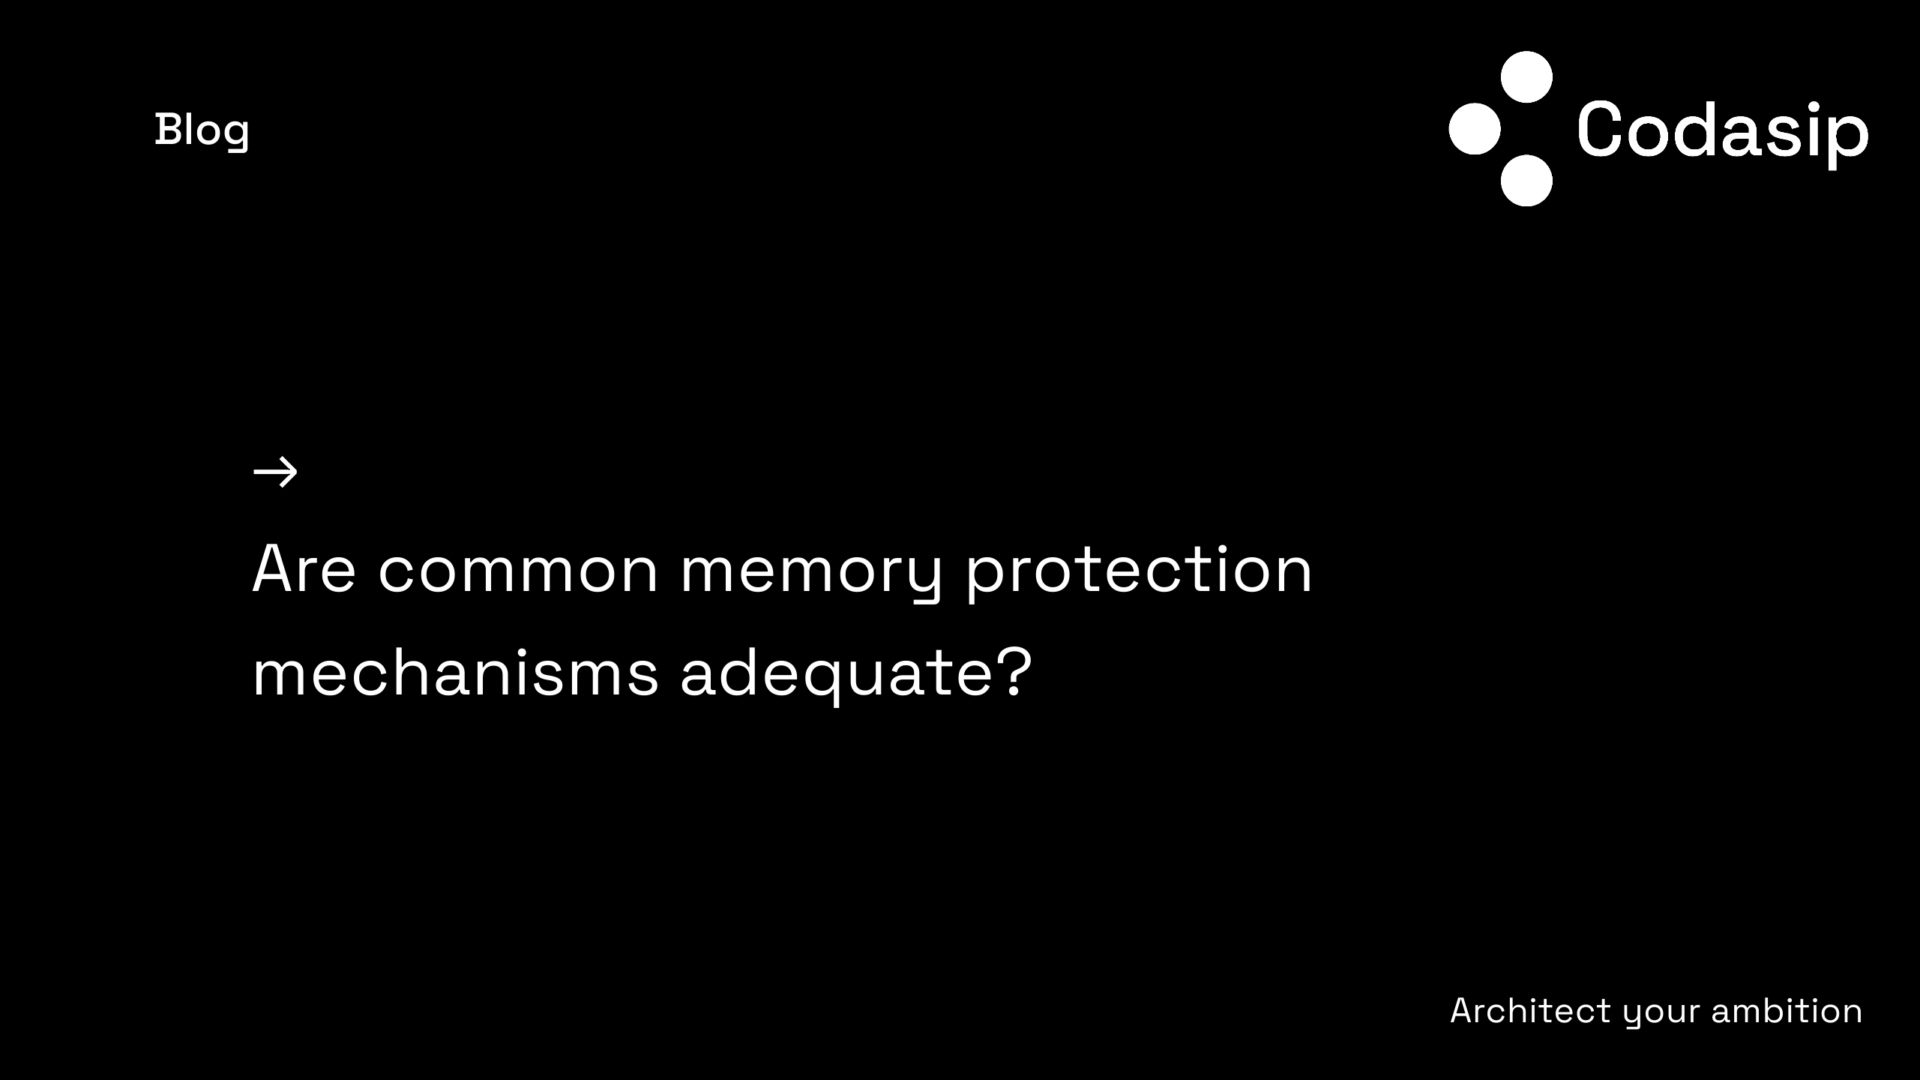 Security blog - Are common memory protection mechanisms adequate